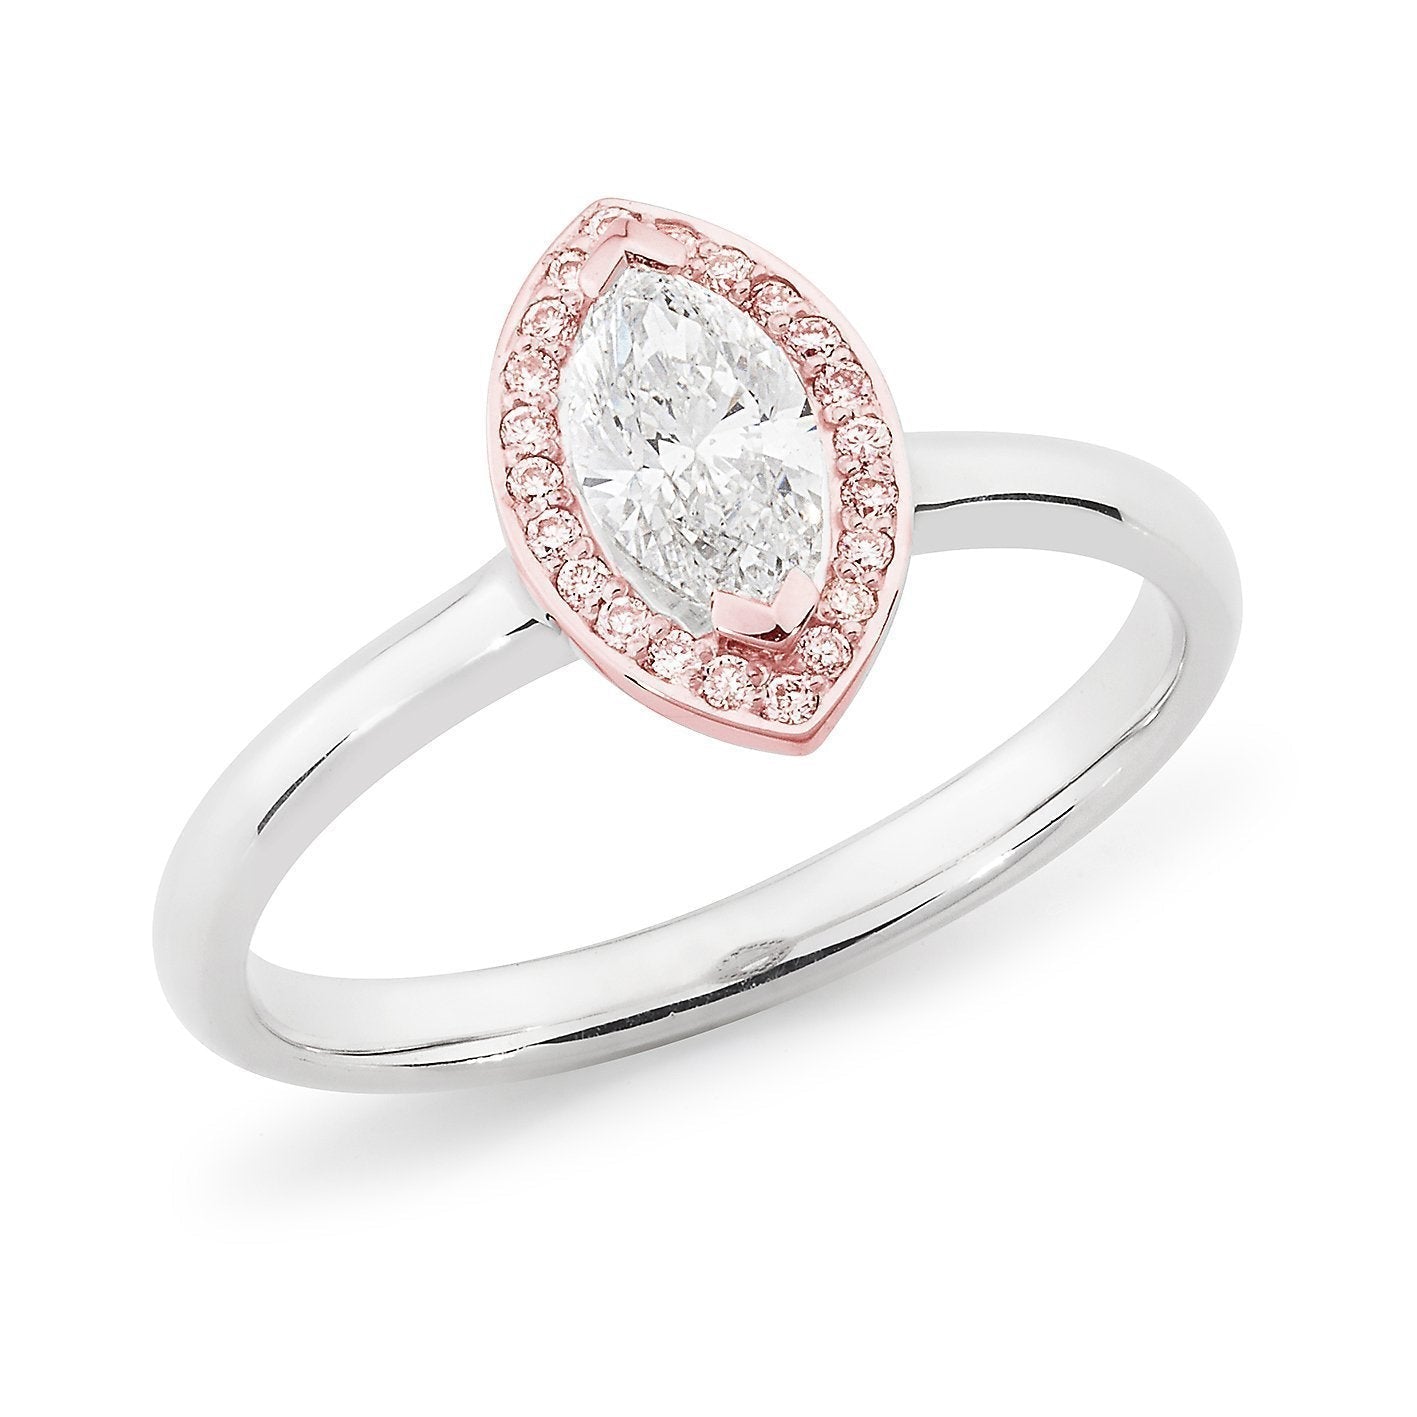 PINK CAVIAR 0.61ct White Marquise Cut & Pink Diamond Halo Engagement Ring in 18ct White Gold